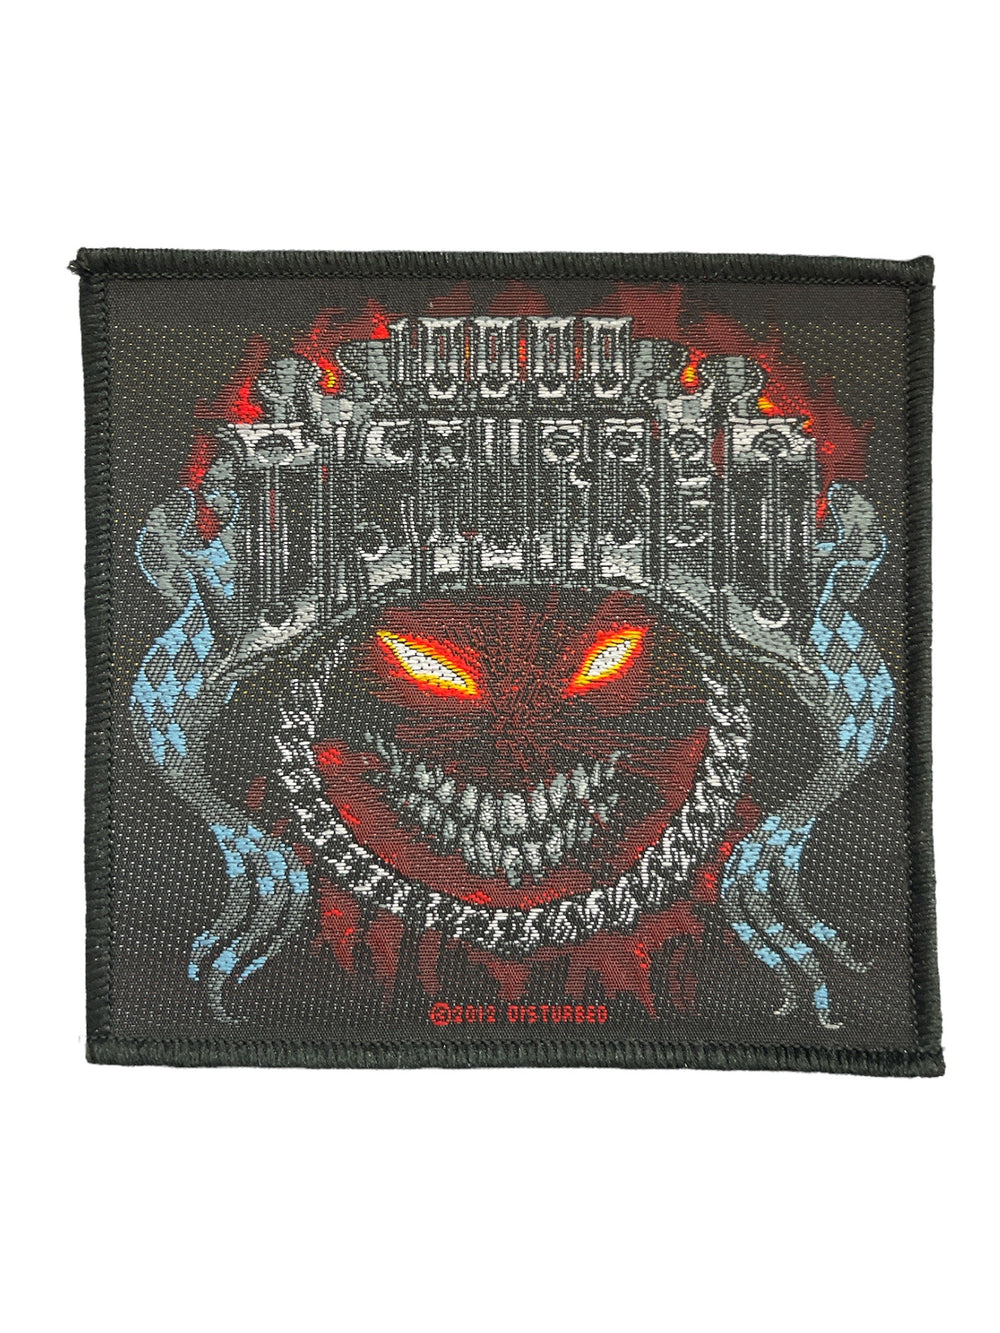 Disturbed Smile Official Woven Patch Brand New